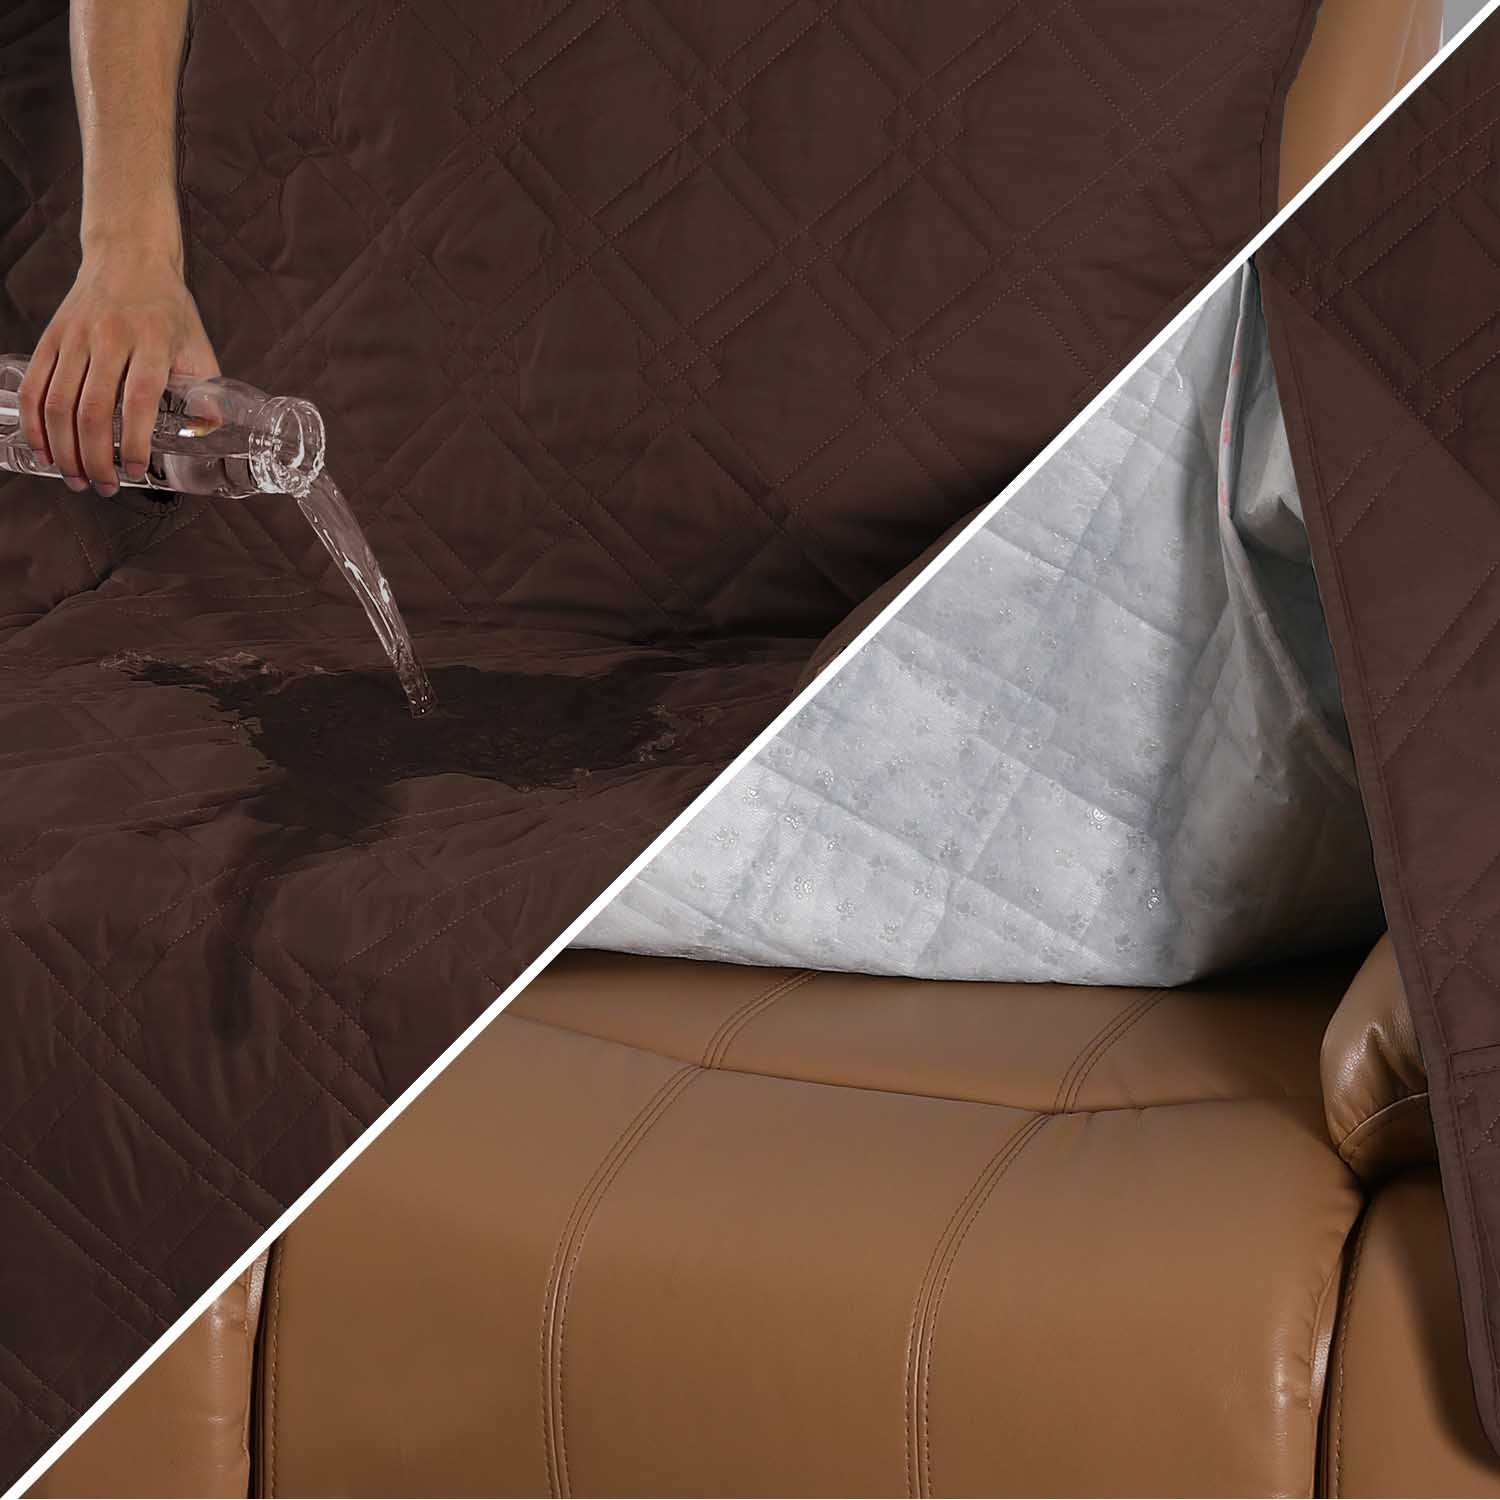 Easy-Going Loveseat Recliner Cover Reversible Couch Cover for Double/Three Recliner Quilted Material Waterproof